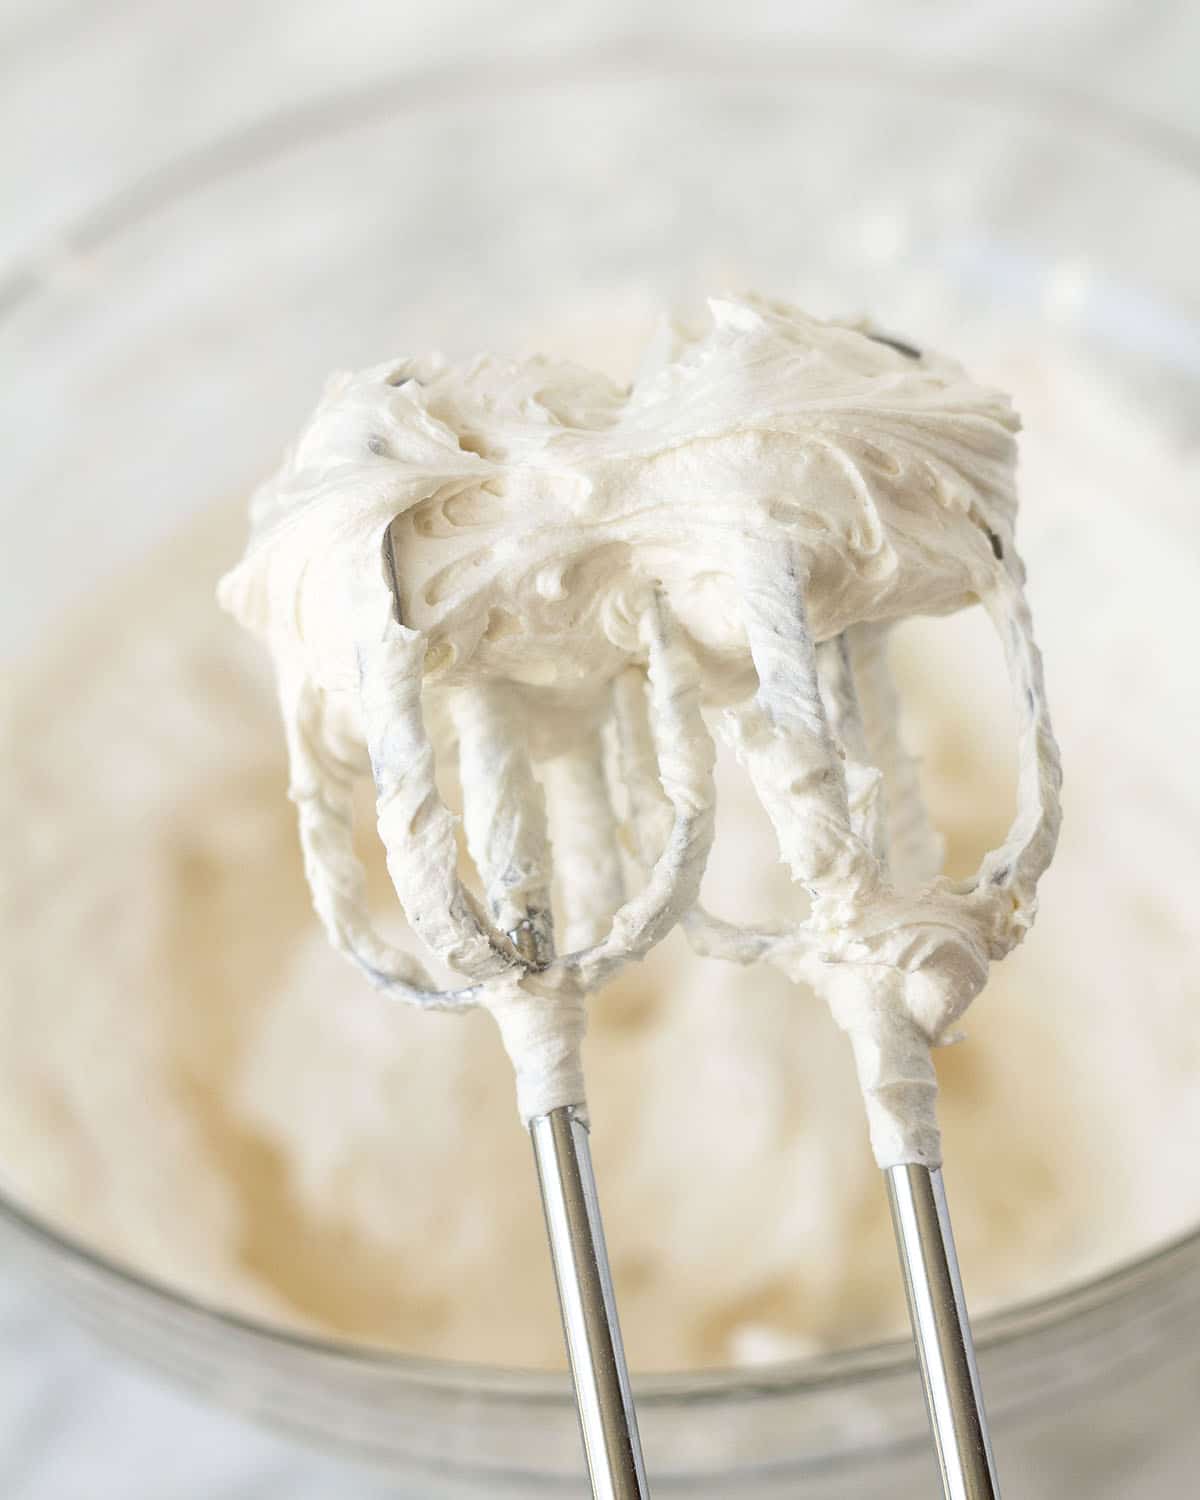 Image shows vanilla frosting on the beaters of an electric mixer.